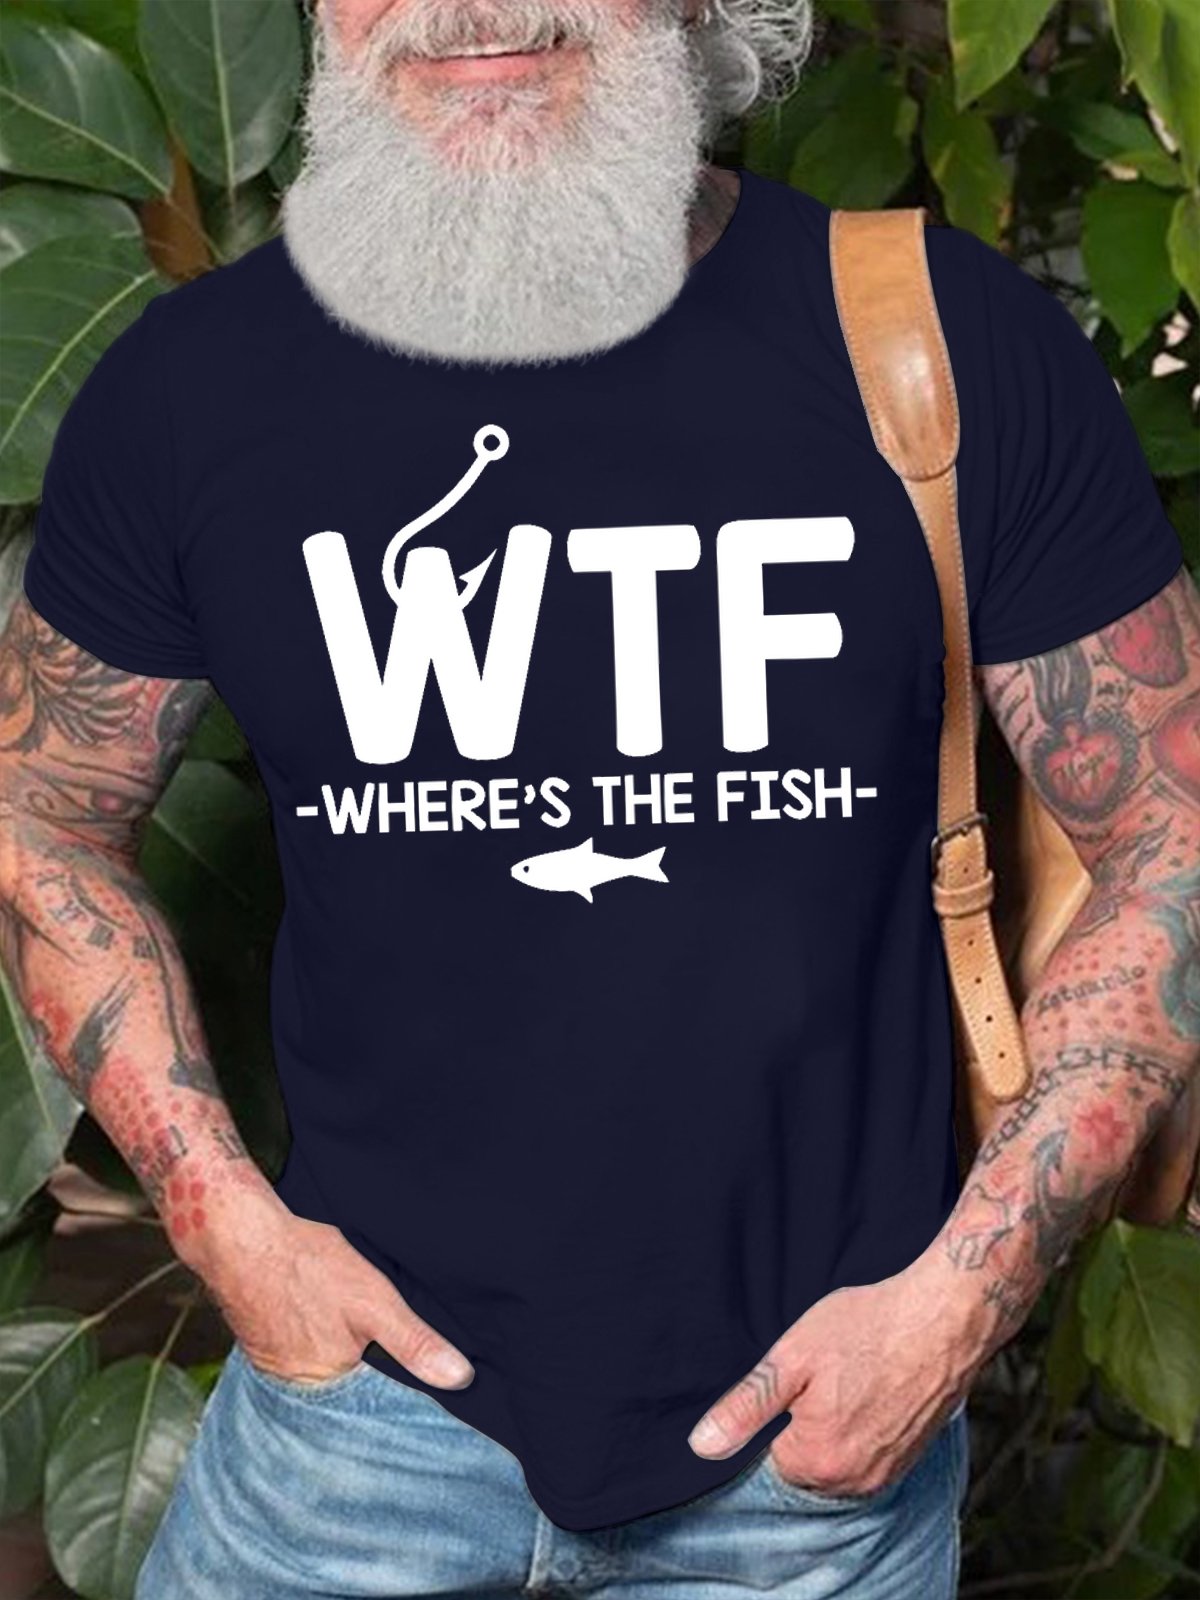 Men's WTF Where's The Fish Funny Graphic Printing Cotton Crew Neck Loose Casual T-Shirt